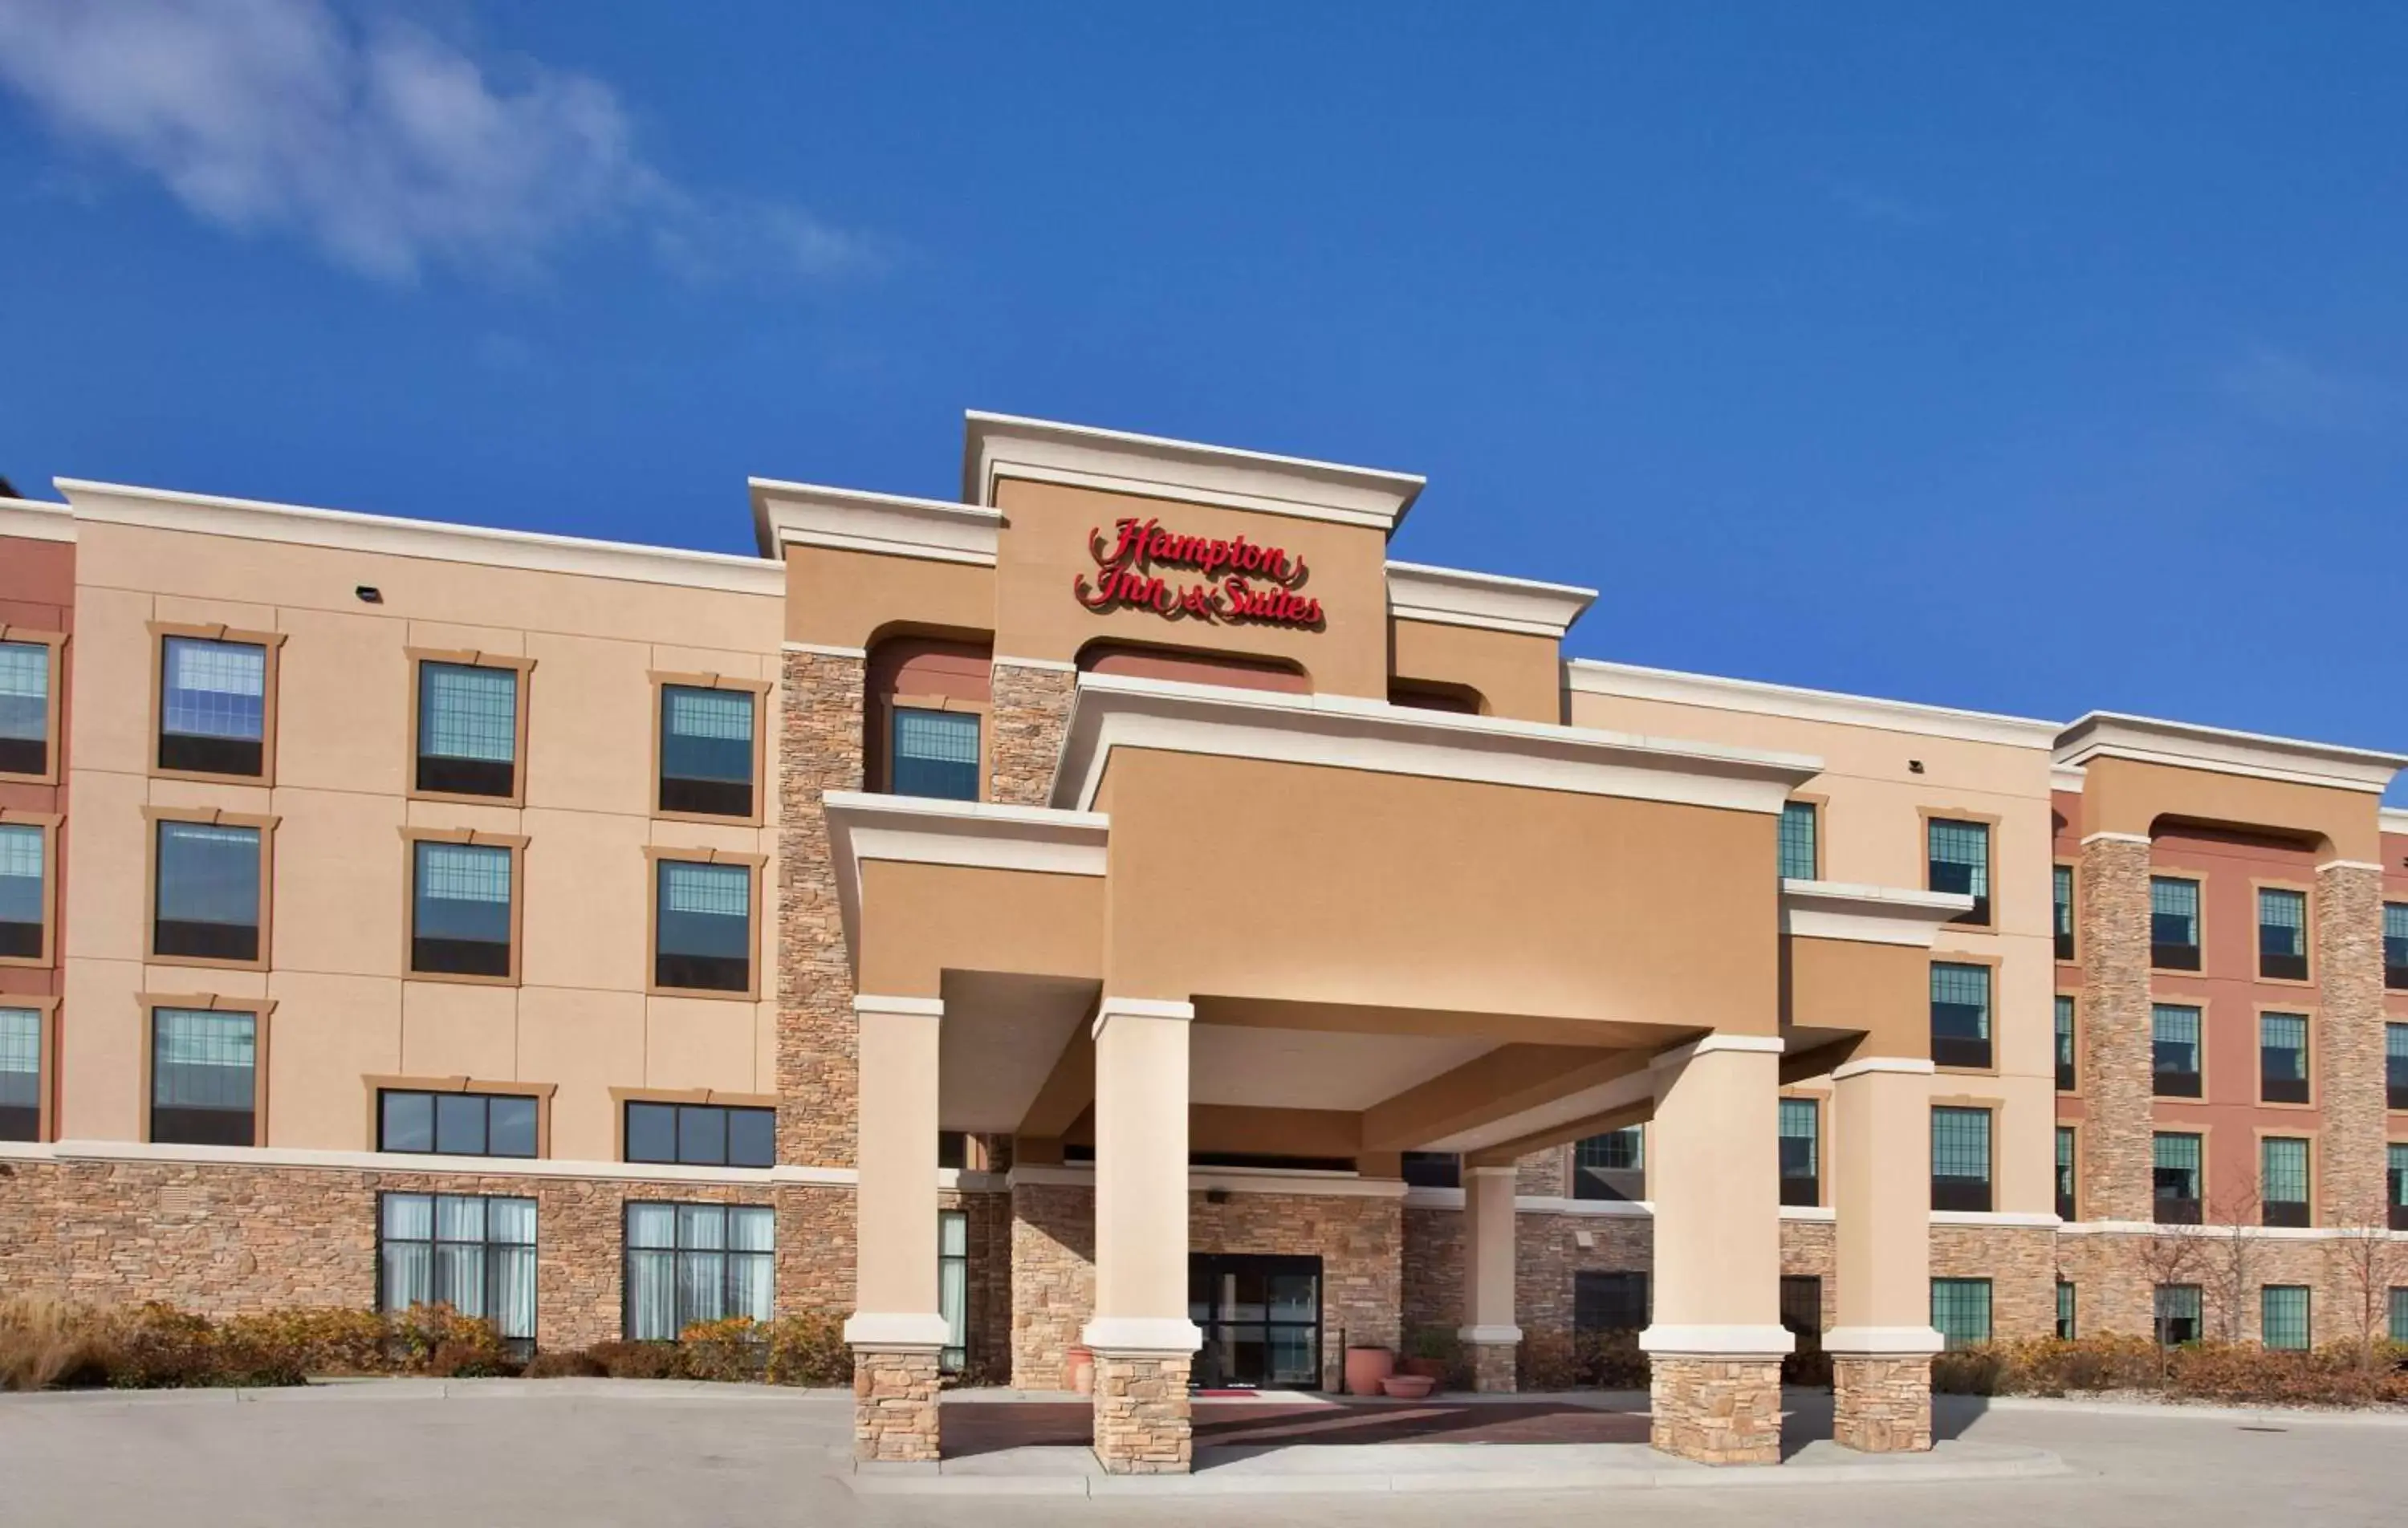 Property Building in Hampton Inn and Suites St. Cloud